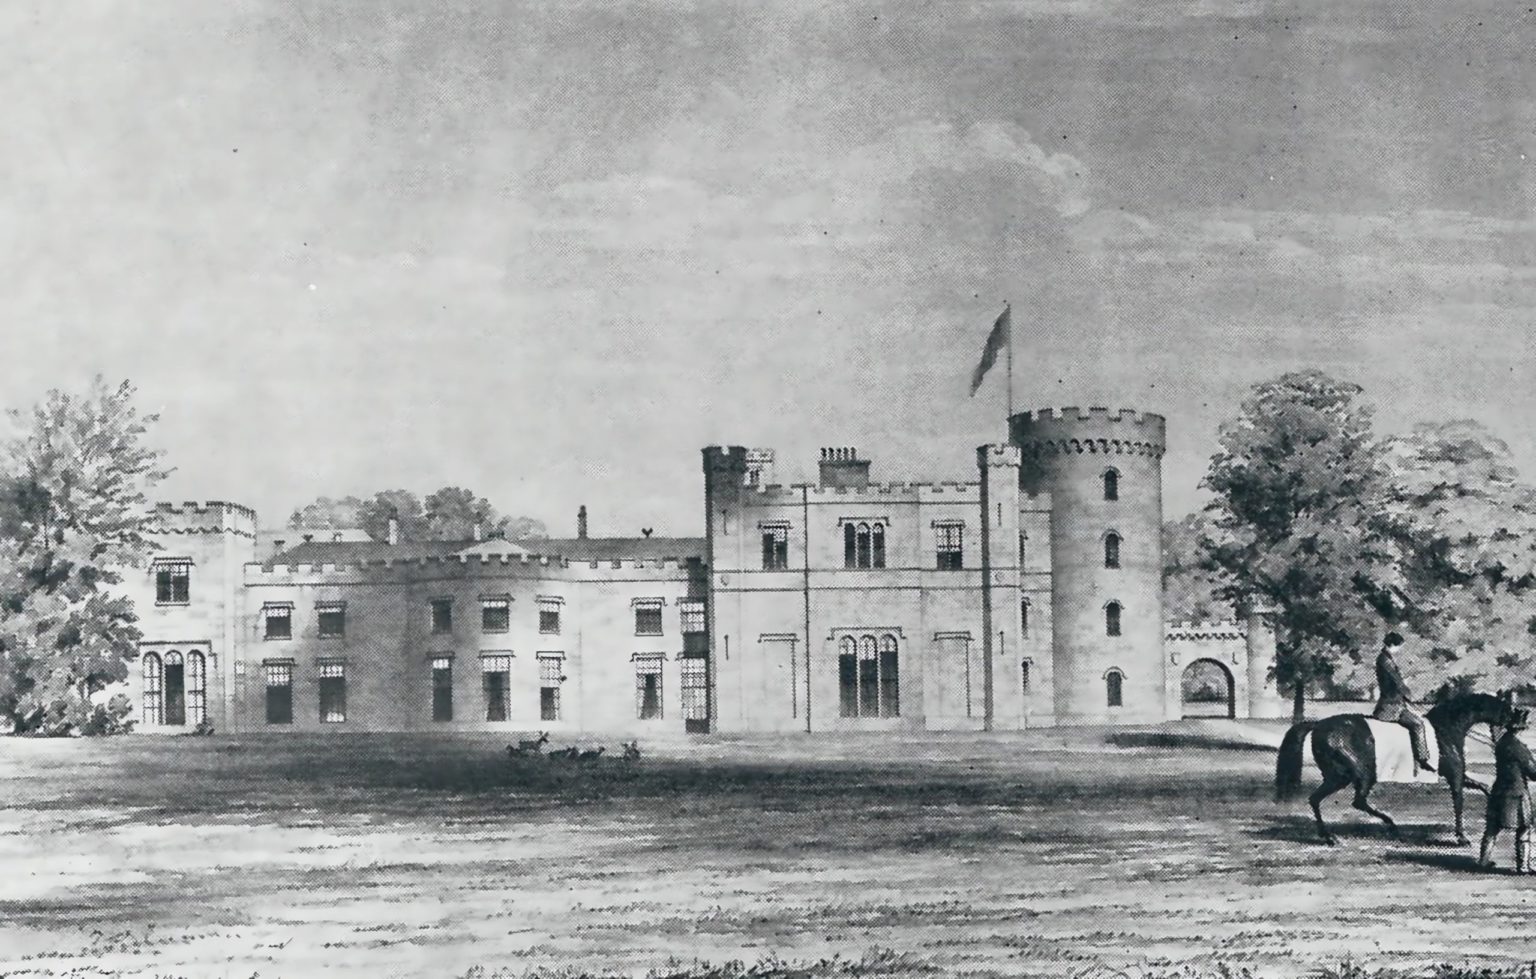 An historical sketch depicting Swinton Park in North Yorkshire